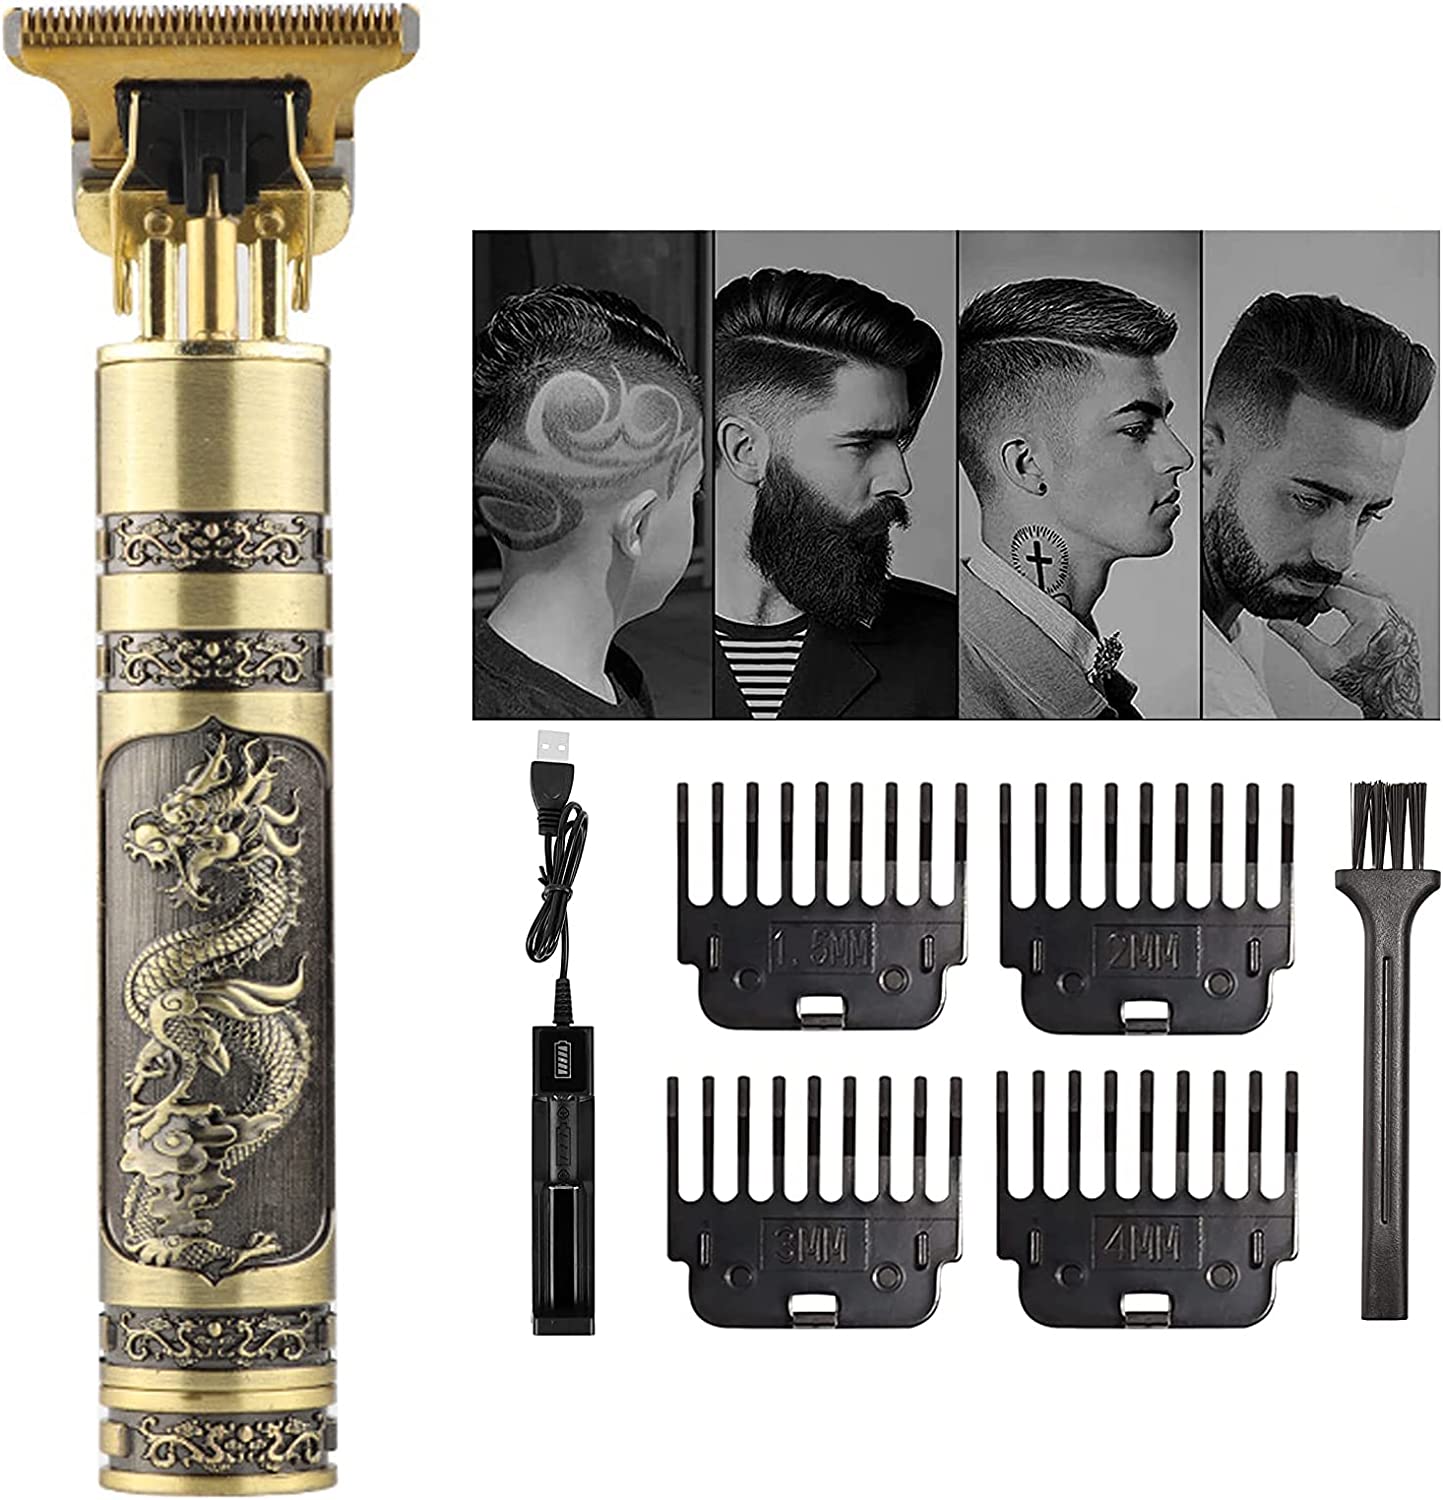 Professional T9 Trimmer: Precision Grooming Tool